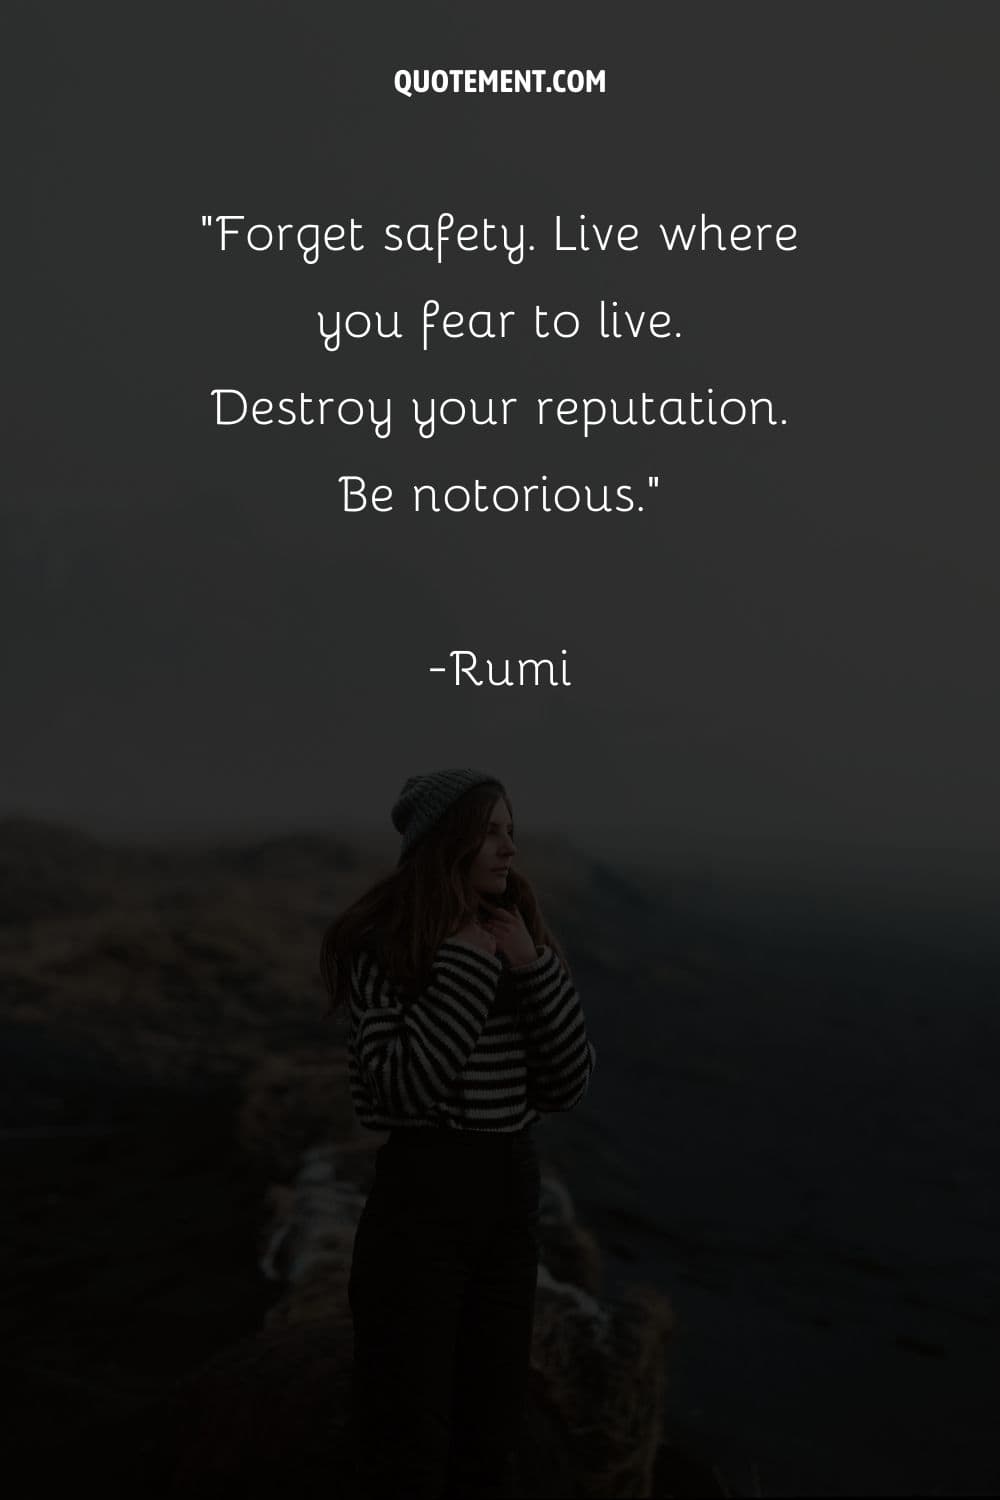 Image of a girl gazing over hills representing a quote about being notorious.